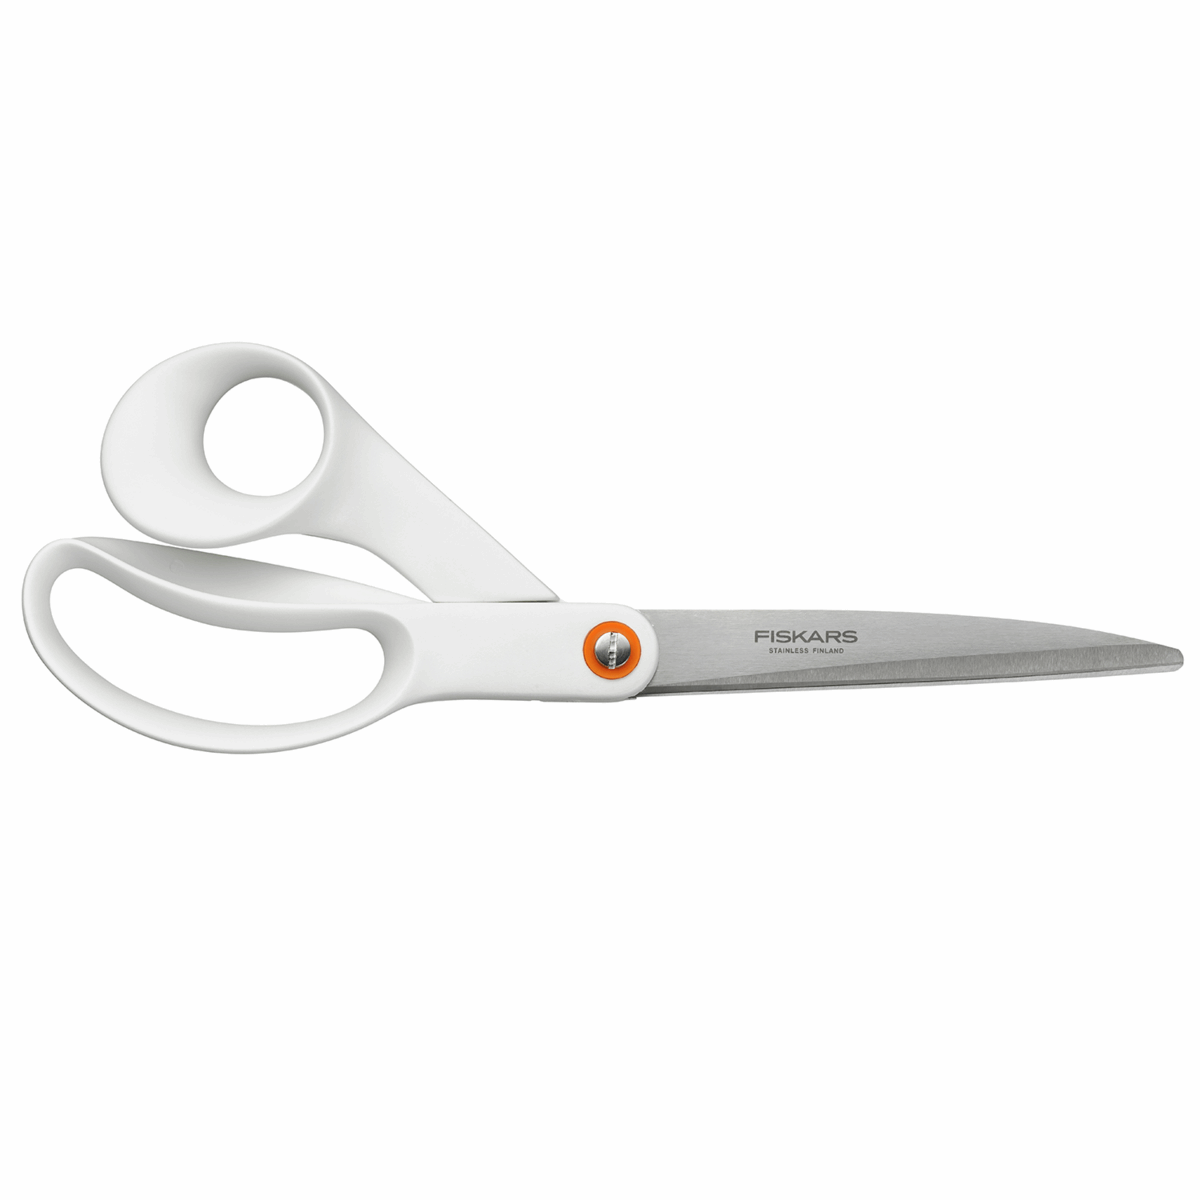 Fiskars Scissors for Thick and Multiple Layers of Fabric - White: 24cm/9.5in